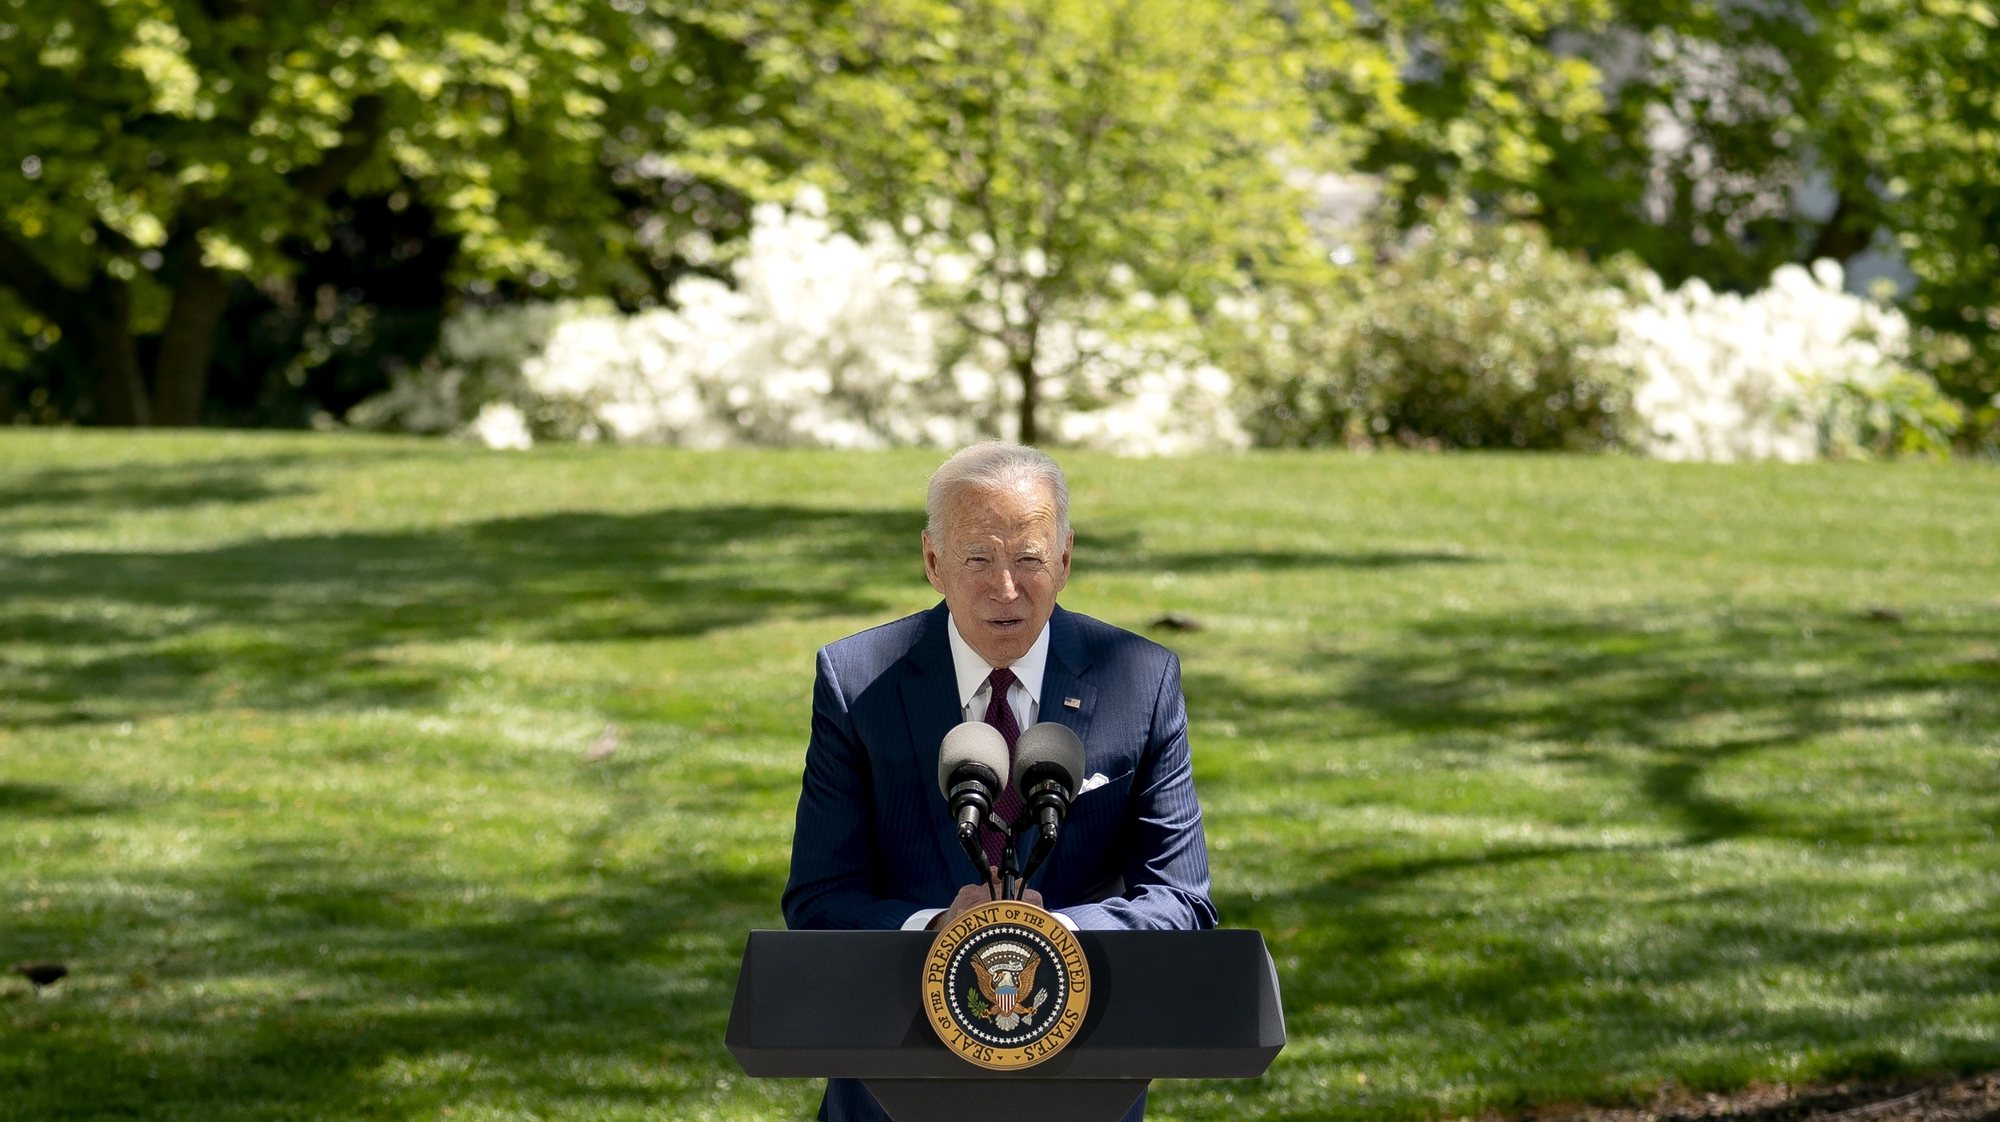 epa09164107 US President Joe Biden speaks on the North Lawn of the White House in Washington, DC, USA, on 27 April 2021. Fully-vaccinated Americans can be unmasked when exercising, dining and socializing outdoors in small groups, federal health officials said on 27 April, and can gather indoors with other fully vaccinated people and family members without masks or social distancing.  EPA/Stefani Reynolds / POOL